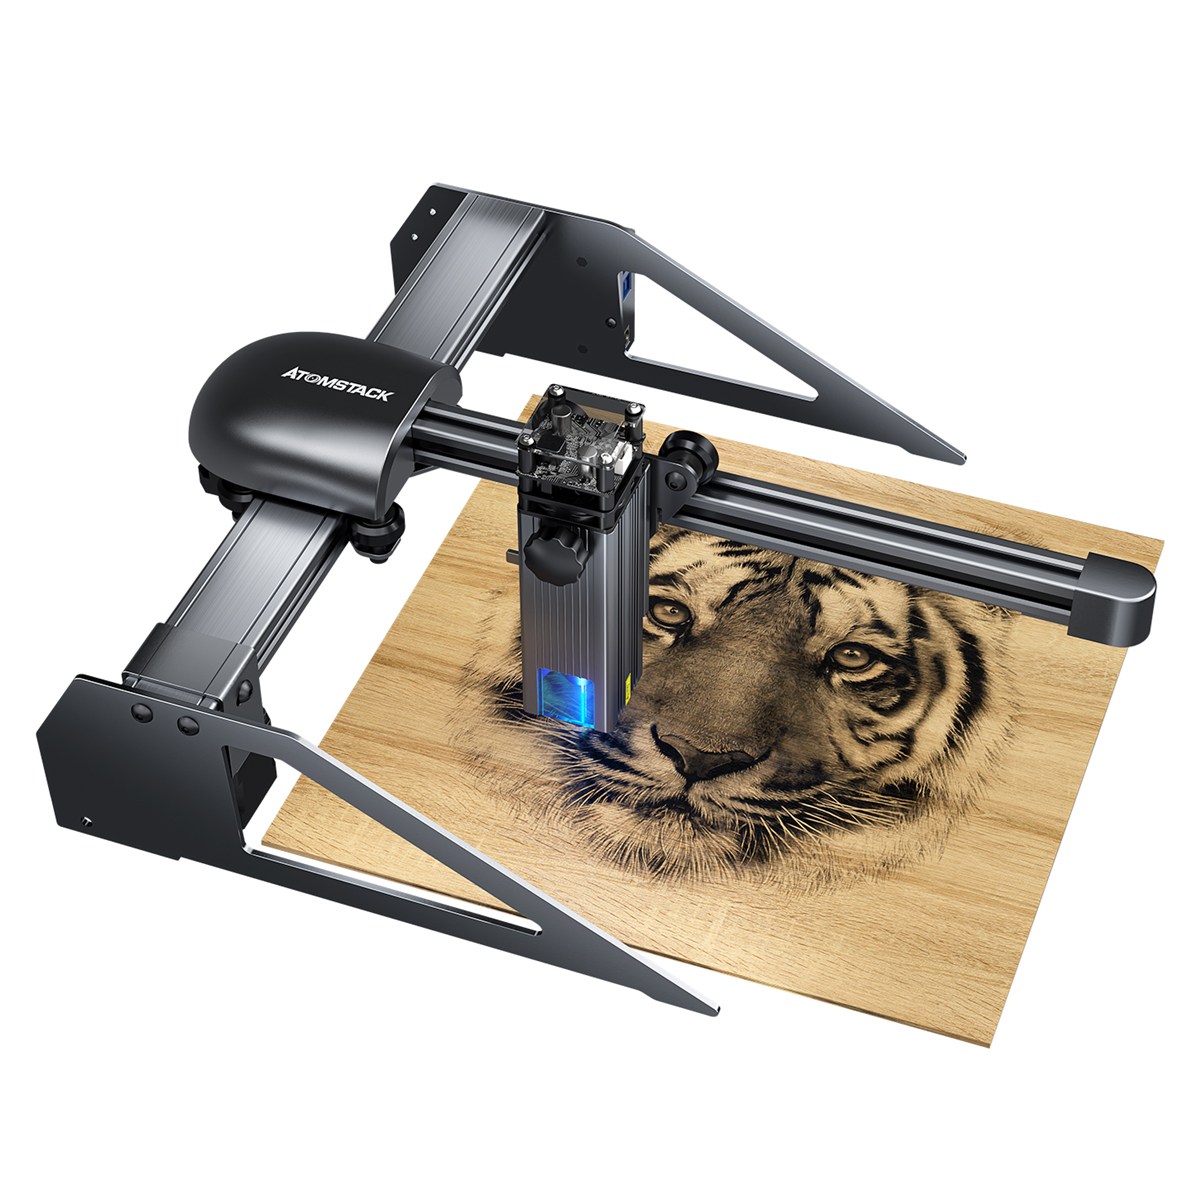 Find New ATOMSTACK P7 M40 Portable Laser Engraving Machine Cutter Wood Cutting Design Desktop DIY Laser Engraver New Eye Protection Design Upgrated Ultra-Fine Laser Focal Area for Sale on Gipsybee.com with cryptocurrencies